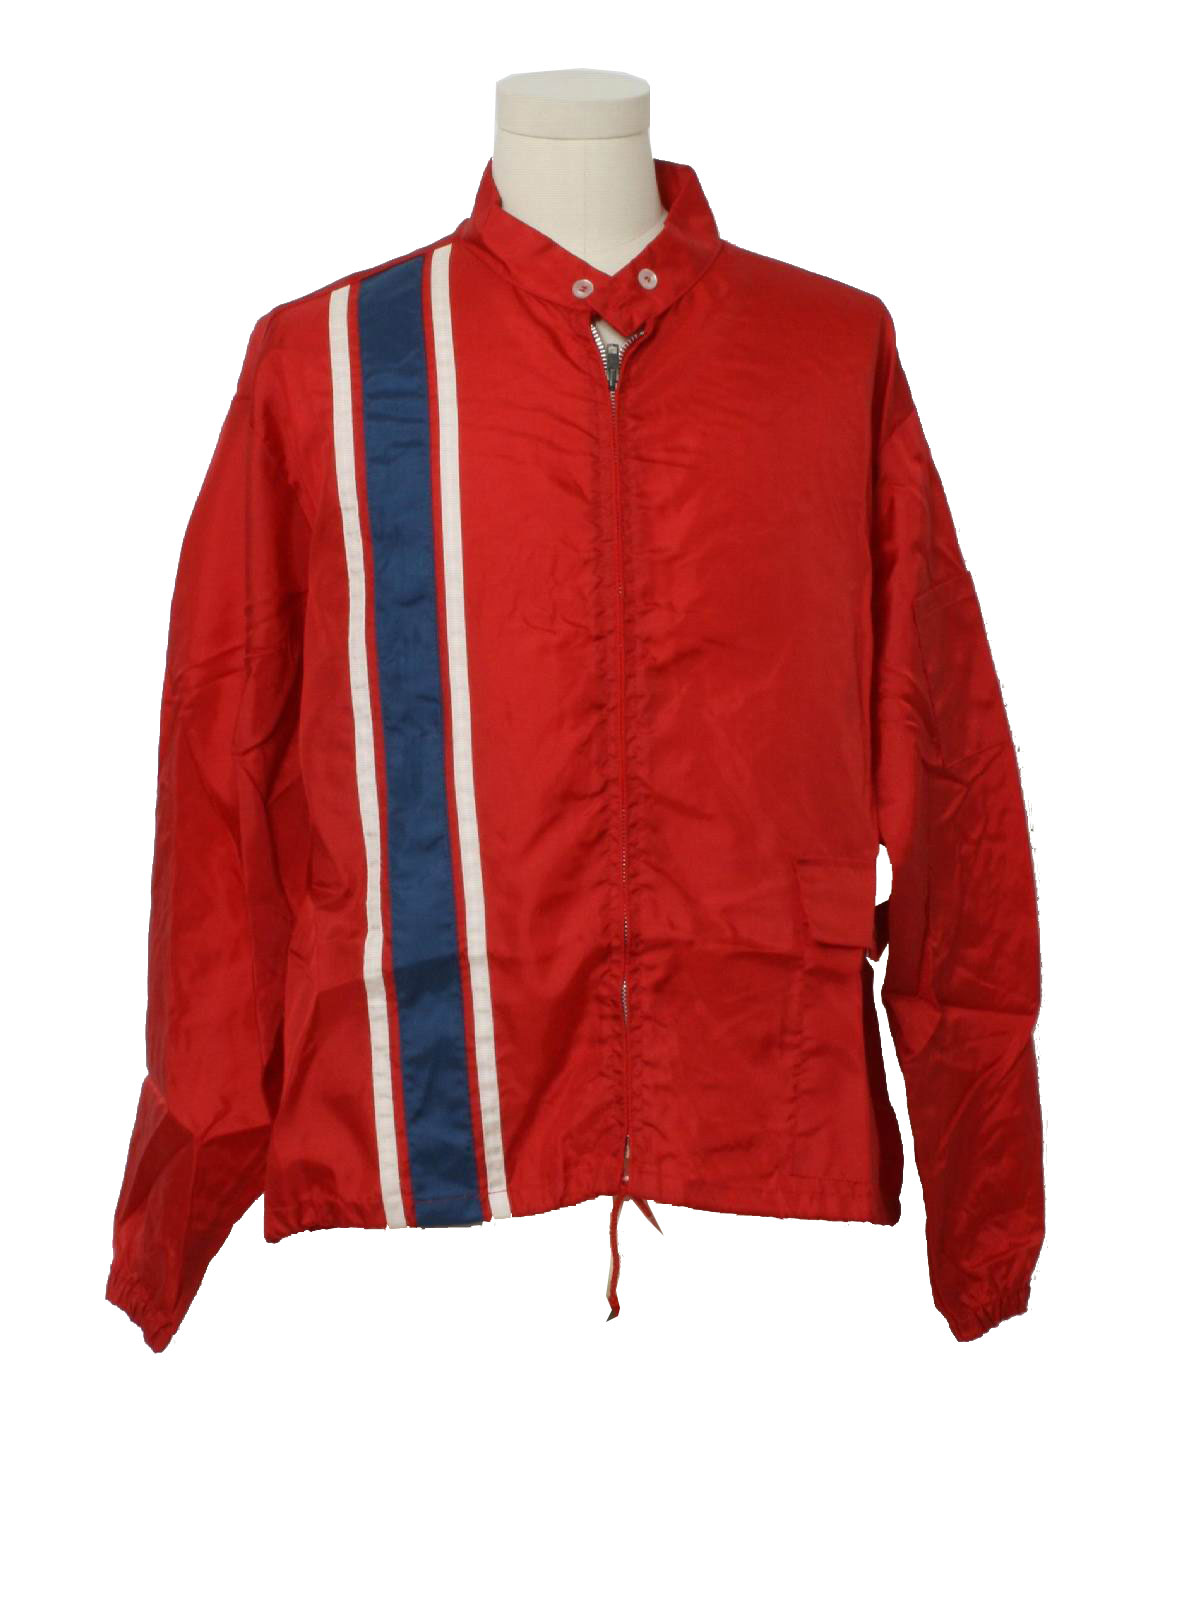 1960's Retro Jacket: 60s -Swingster- Mens red background, navy blue ...